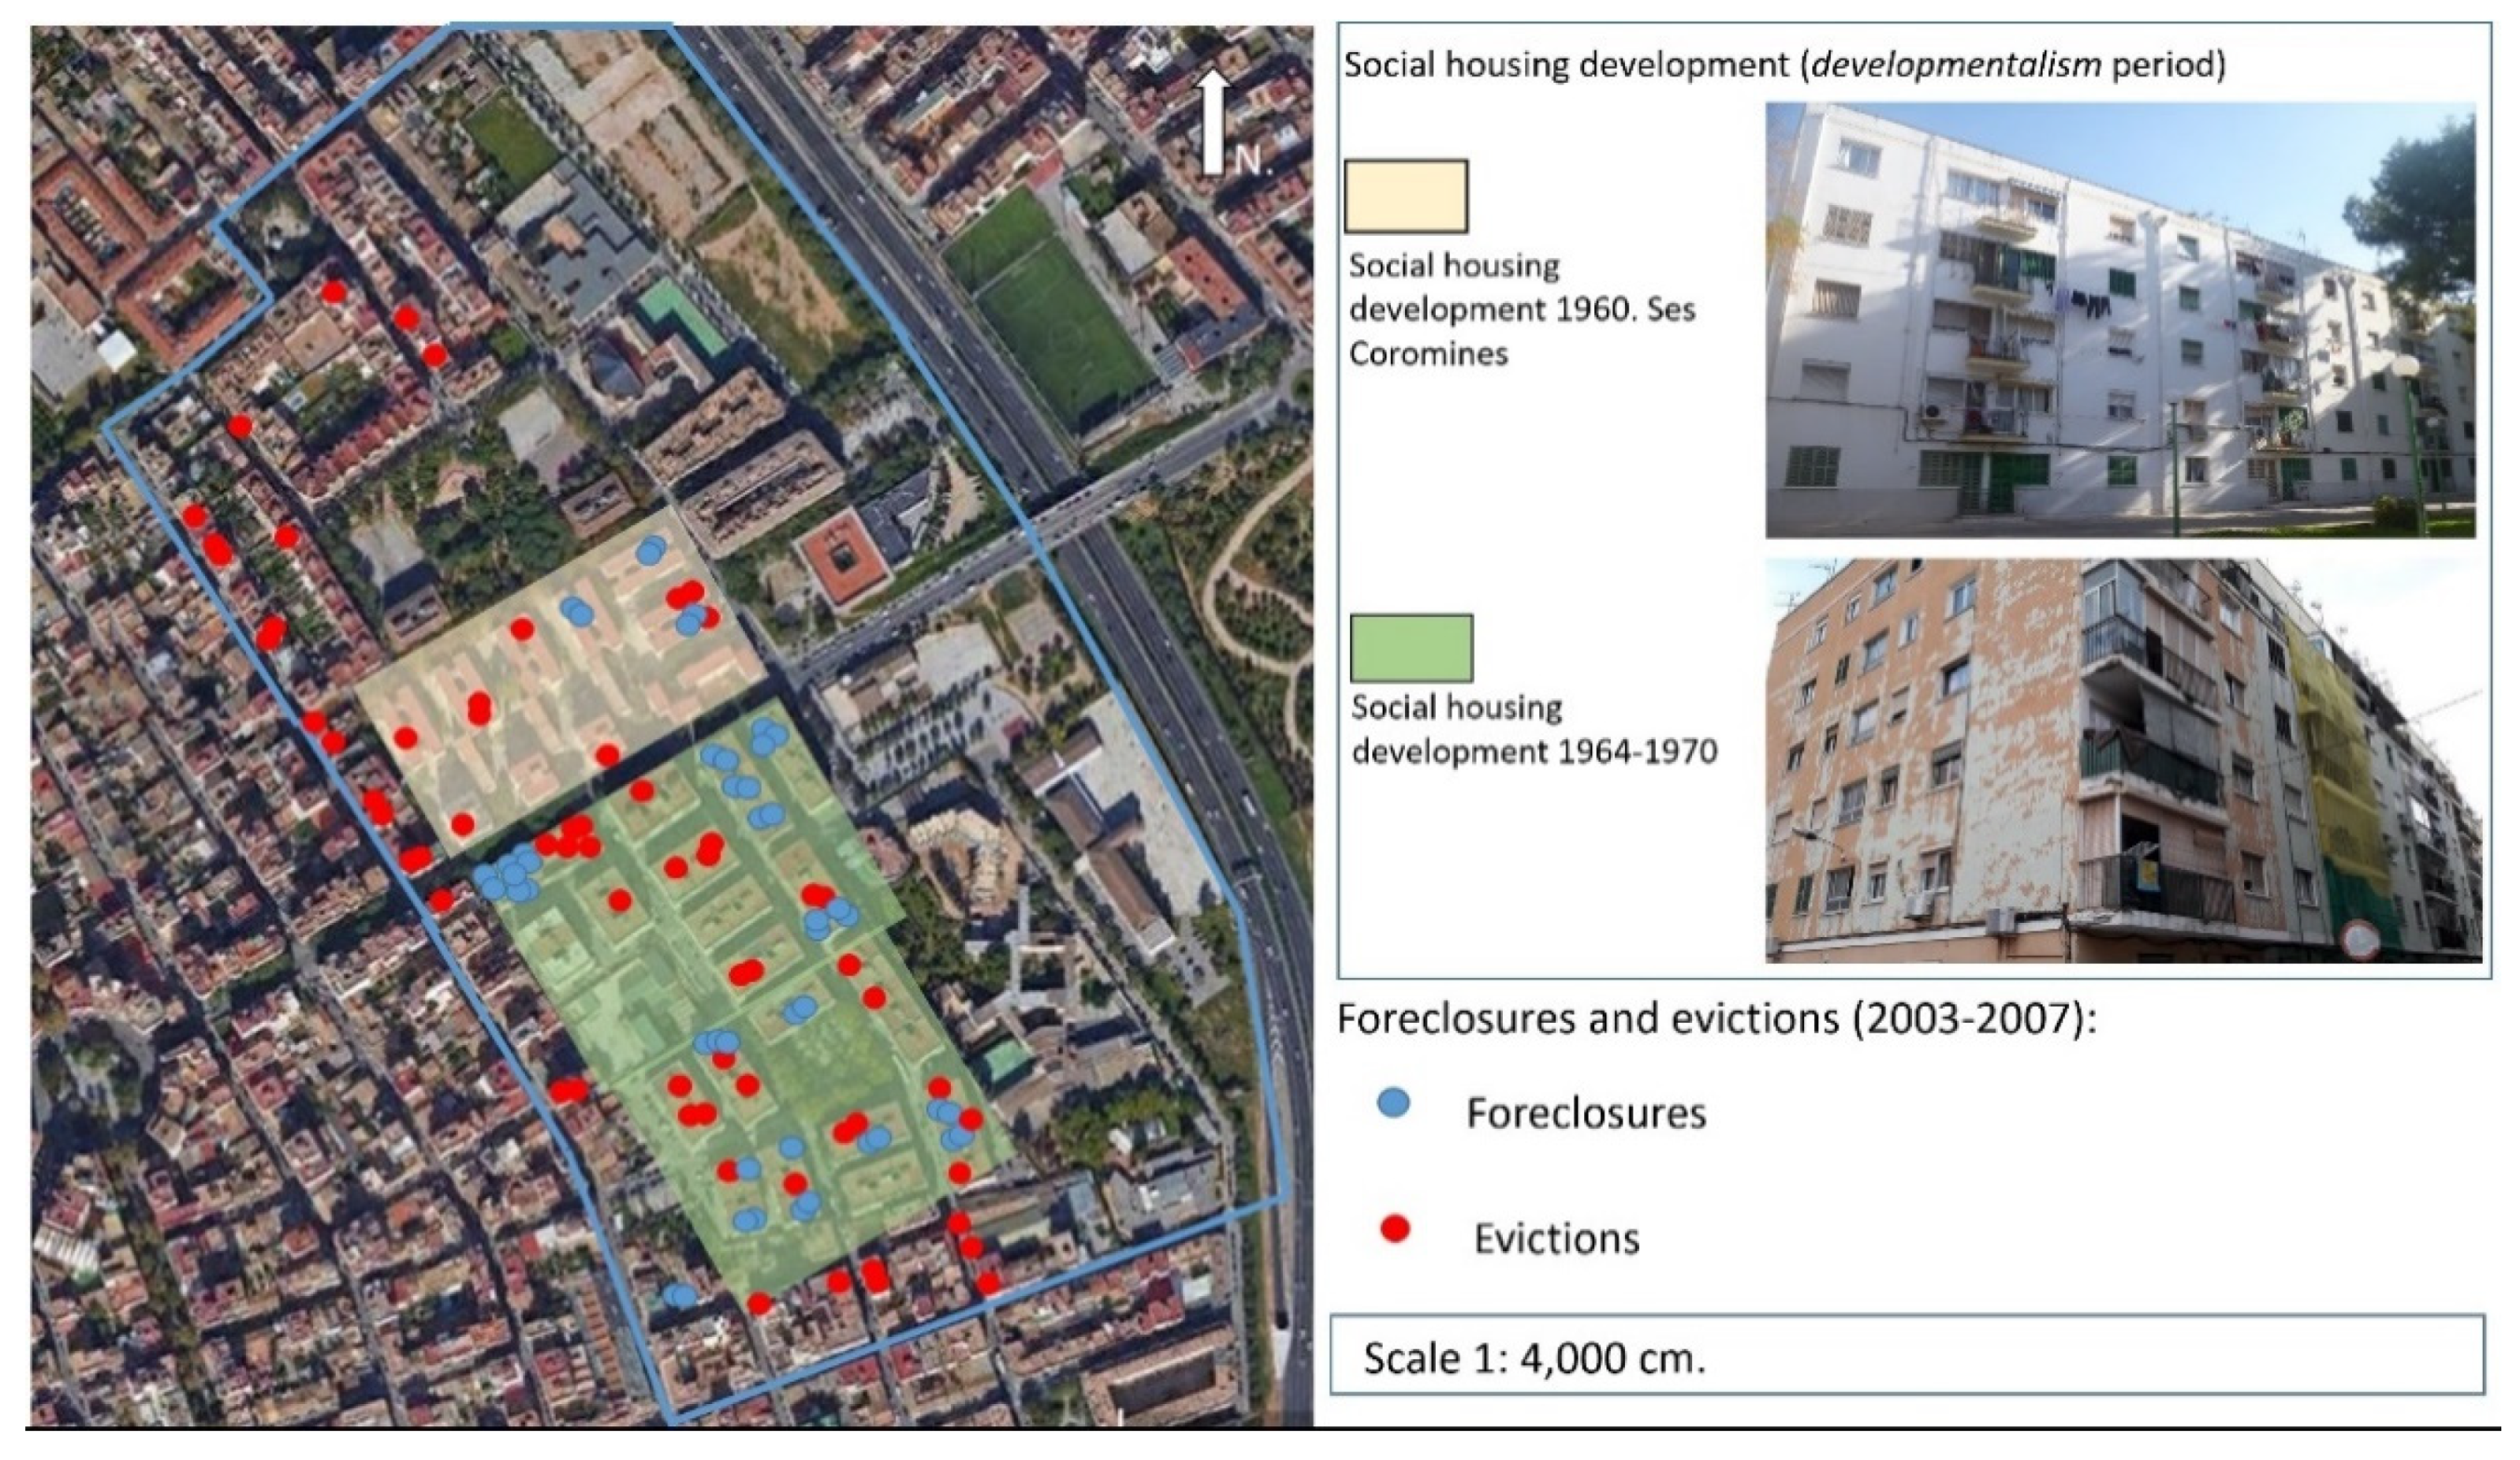 Land | Free Full-Text | Evictions, Foreclosures, and Global Housing  Speculation in Palma, Spain | HTML